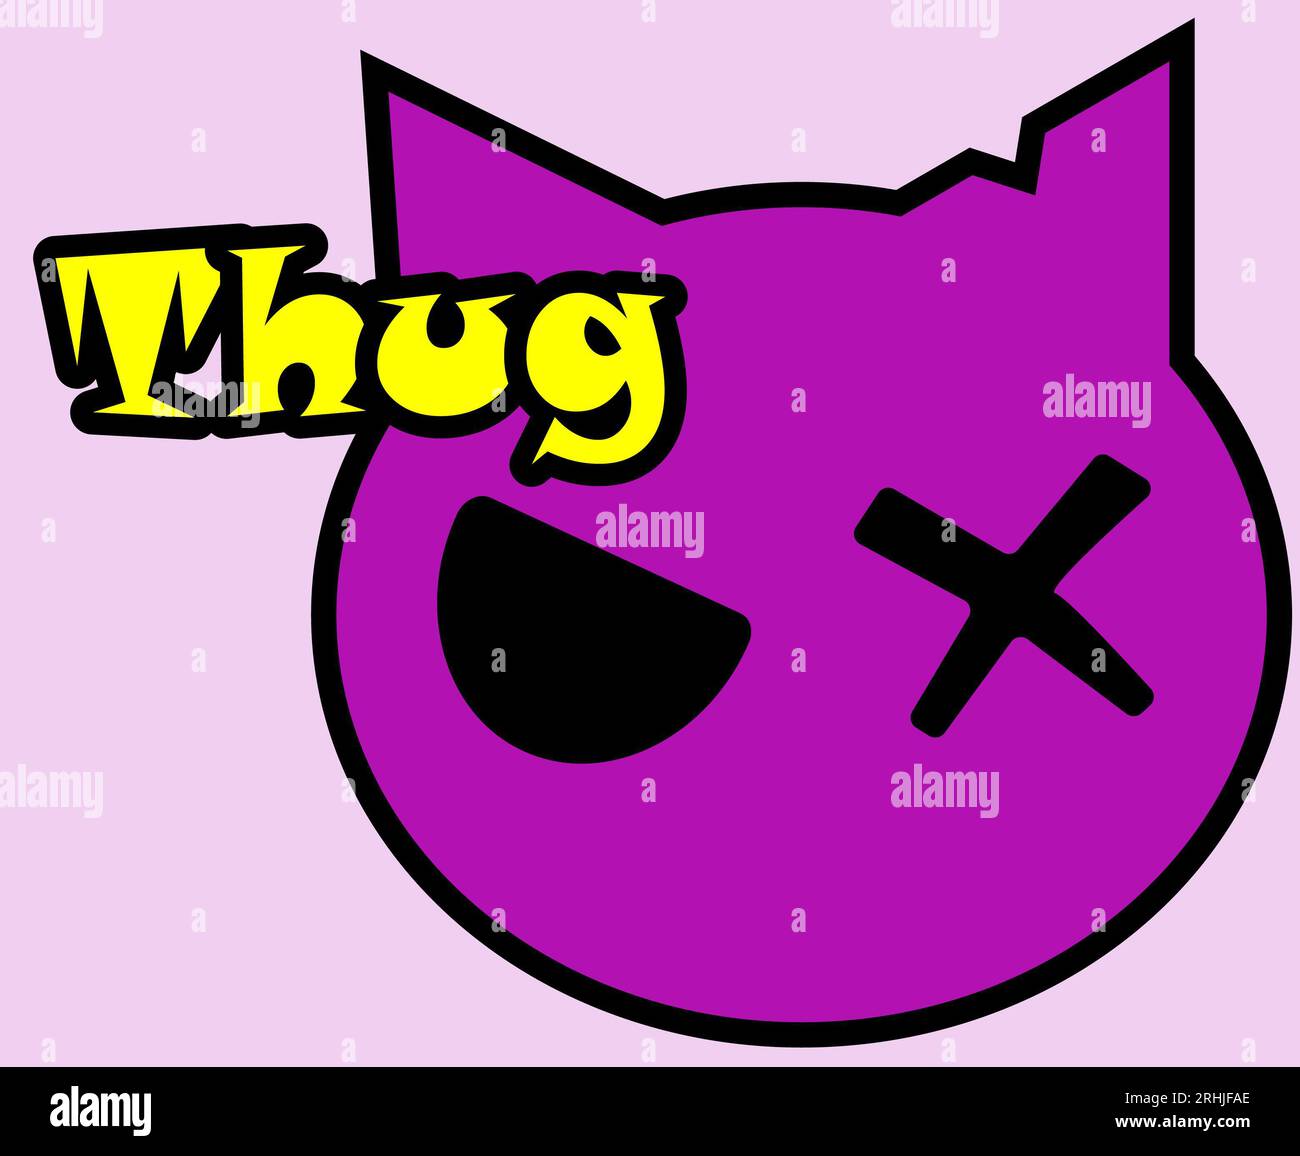 A thug kitty, kitten, cat, cartoon style kitty with evil look, kitty illustration, the word thug, pink and yellow colors, cool sign and tag Stock Photo